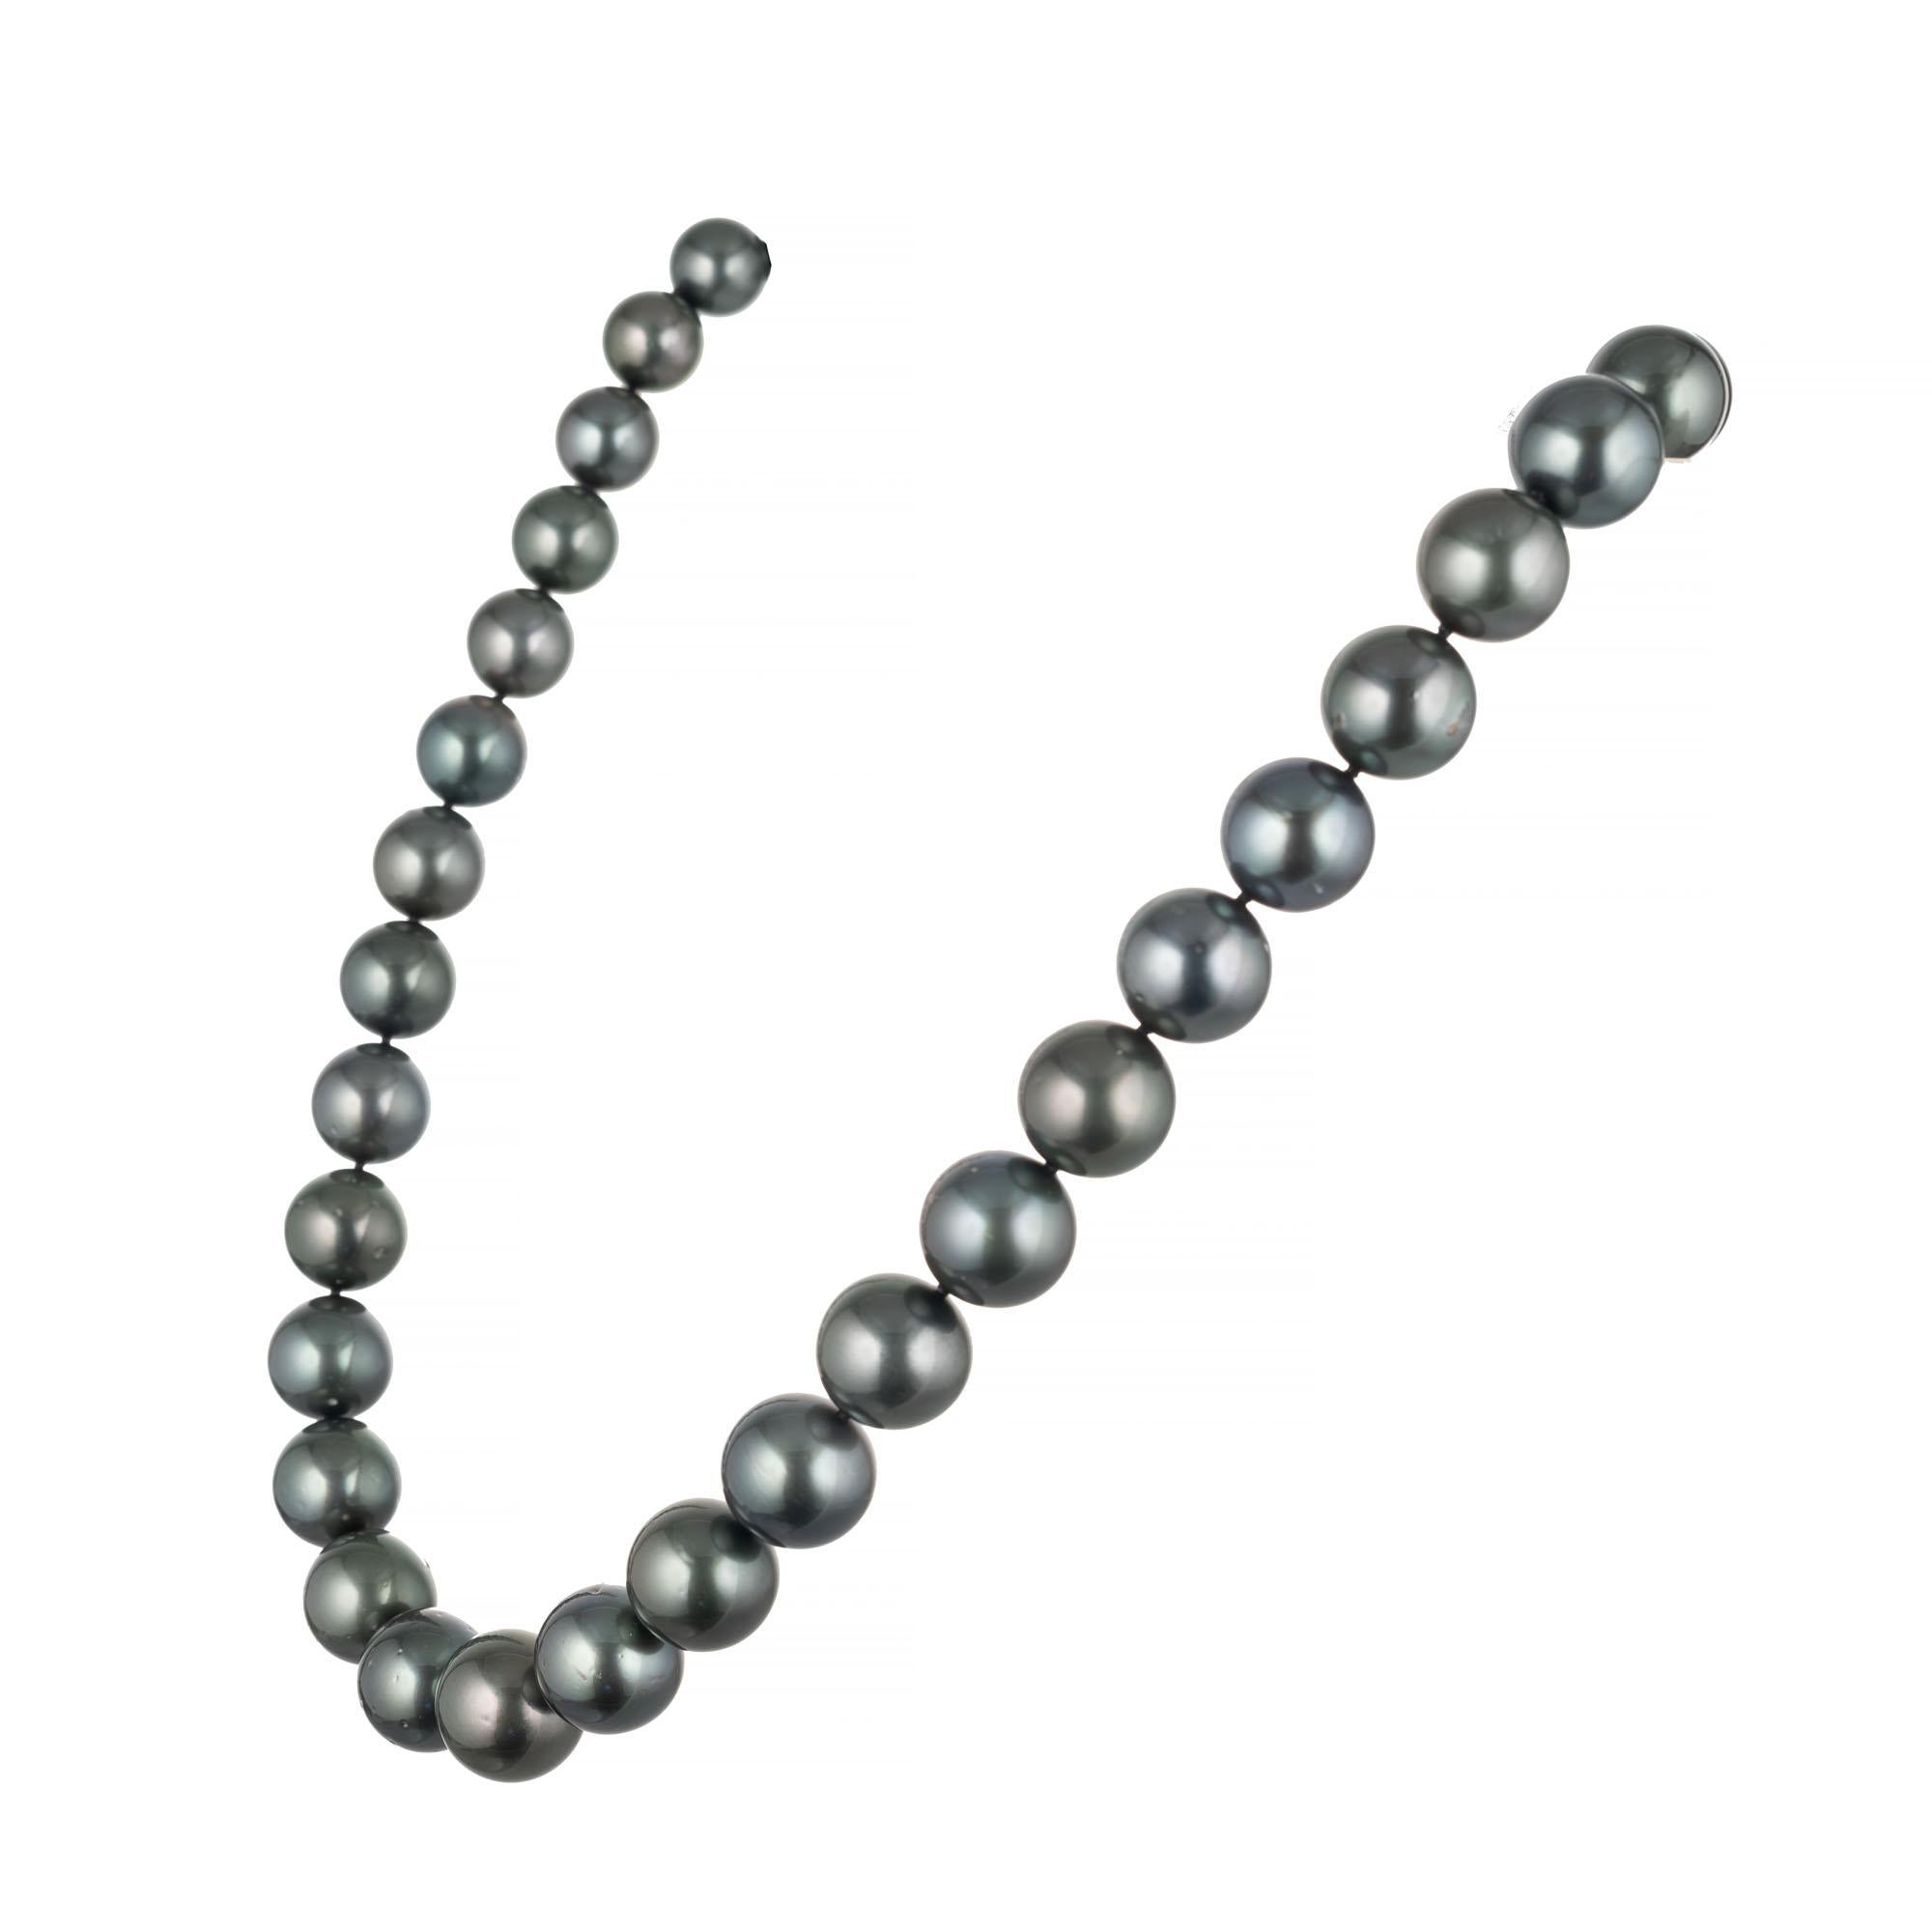 18 Inch strand of black cultured pearls graduating in size from 10mm to 13.25mm attached by a corrugated 10mm 14k white gold ball lock. High lustre few blemishes. Well matched.

37 cultured south sea black pearls 10-13.25mm
14k white gold 
Stamped: